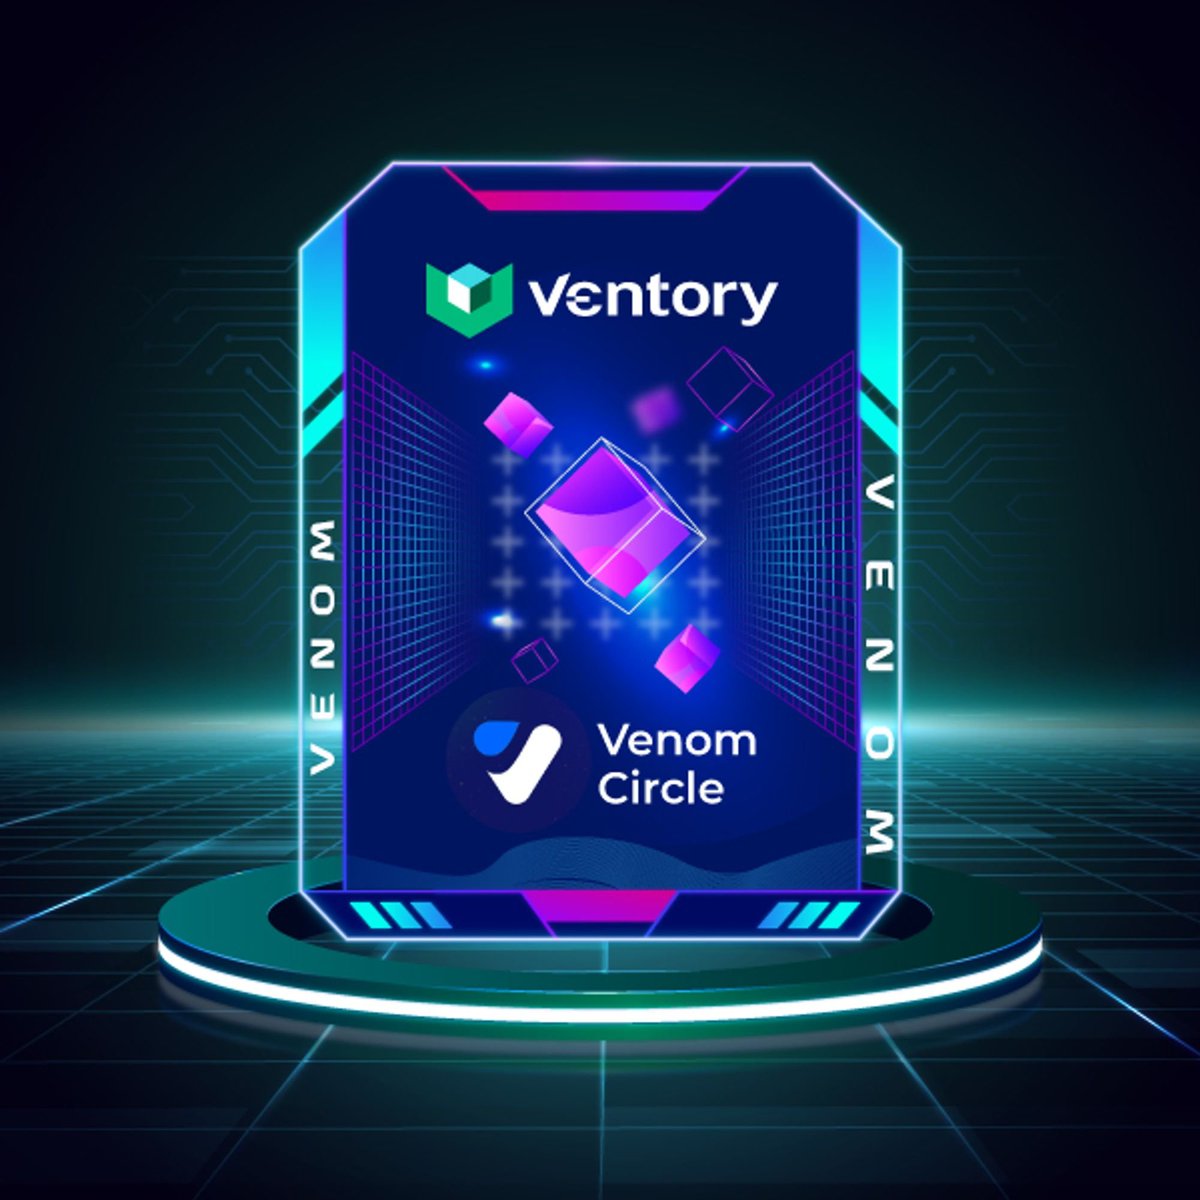 Venom Circle🤝Ventory
😎If you own our NFT, you will be rewarded

🔥Complete the task and claim your free NFT: galxe.com/ventory/campai…

The collaboration of @venom_circle and @Ventory_gg will help the @Venom_network_ ecosystem explode💥